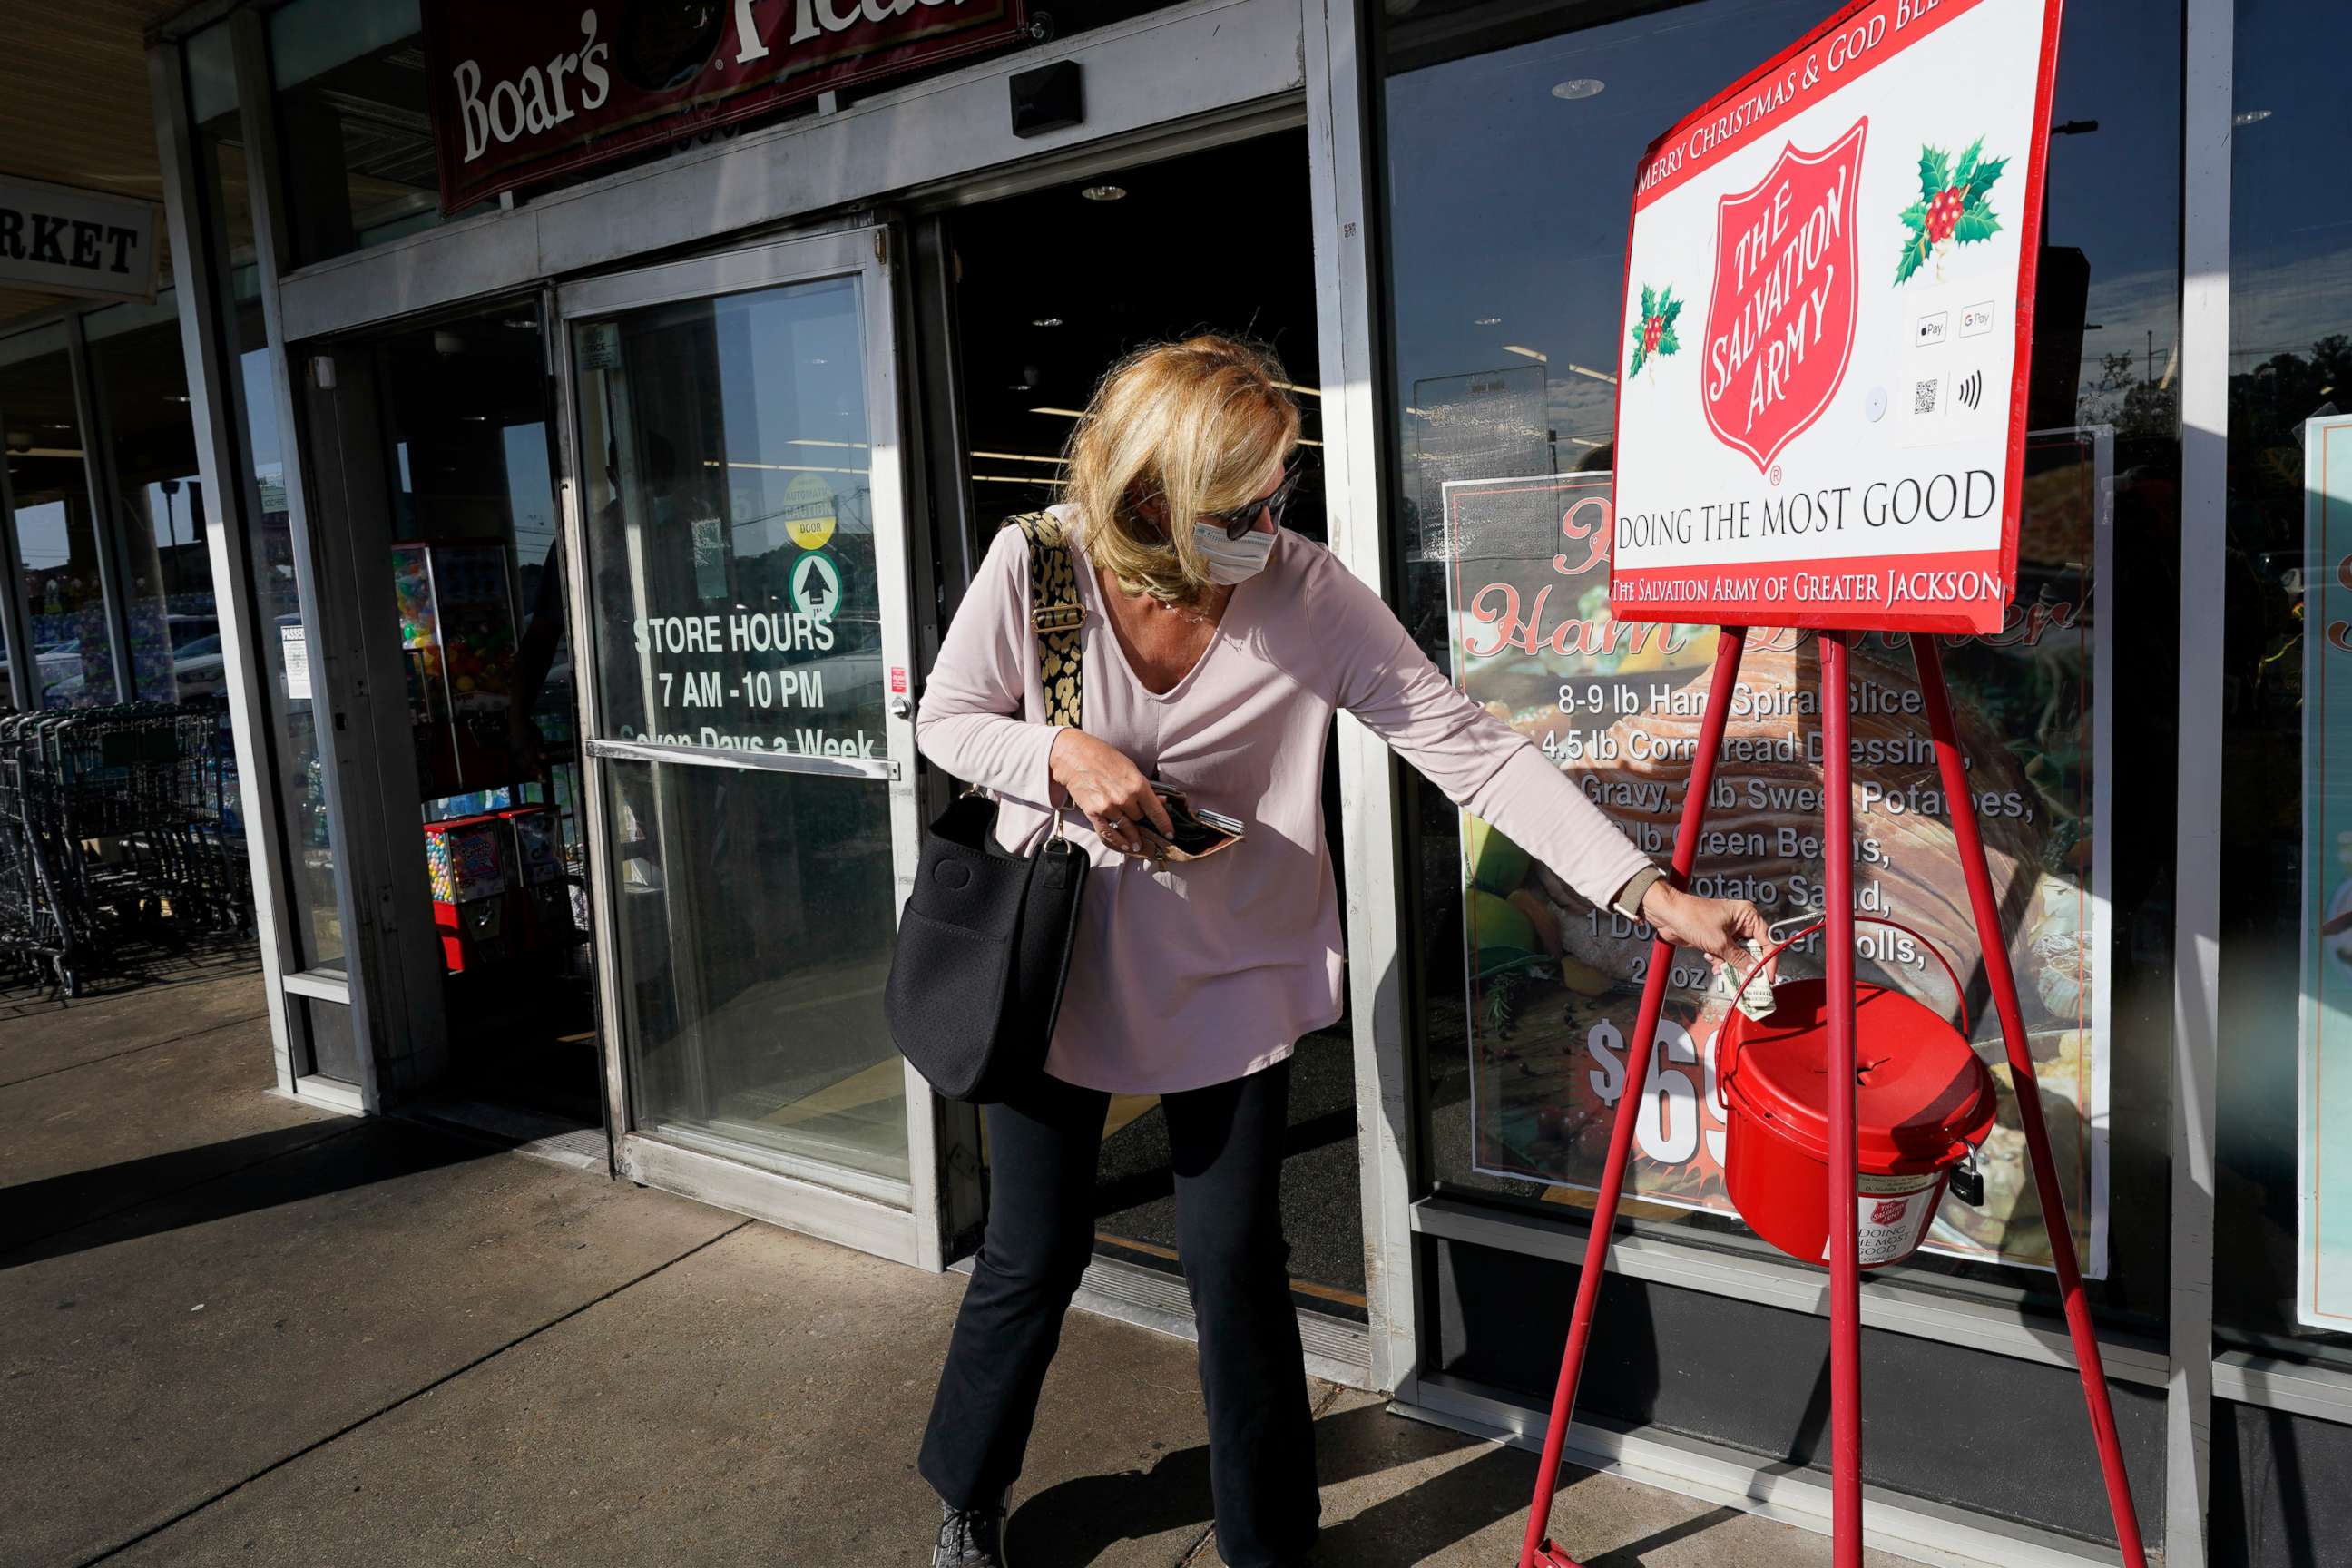 PHOTO: A Corner Market grocery store customer places money in the iconic Salvation Army donations collections bucket in Jackson, Miss., Wednesday, Nov. 25, 2020.